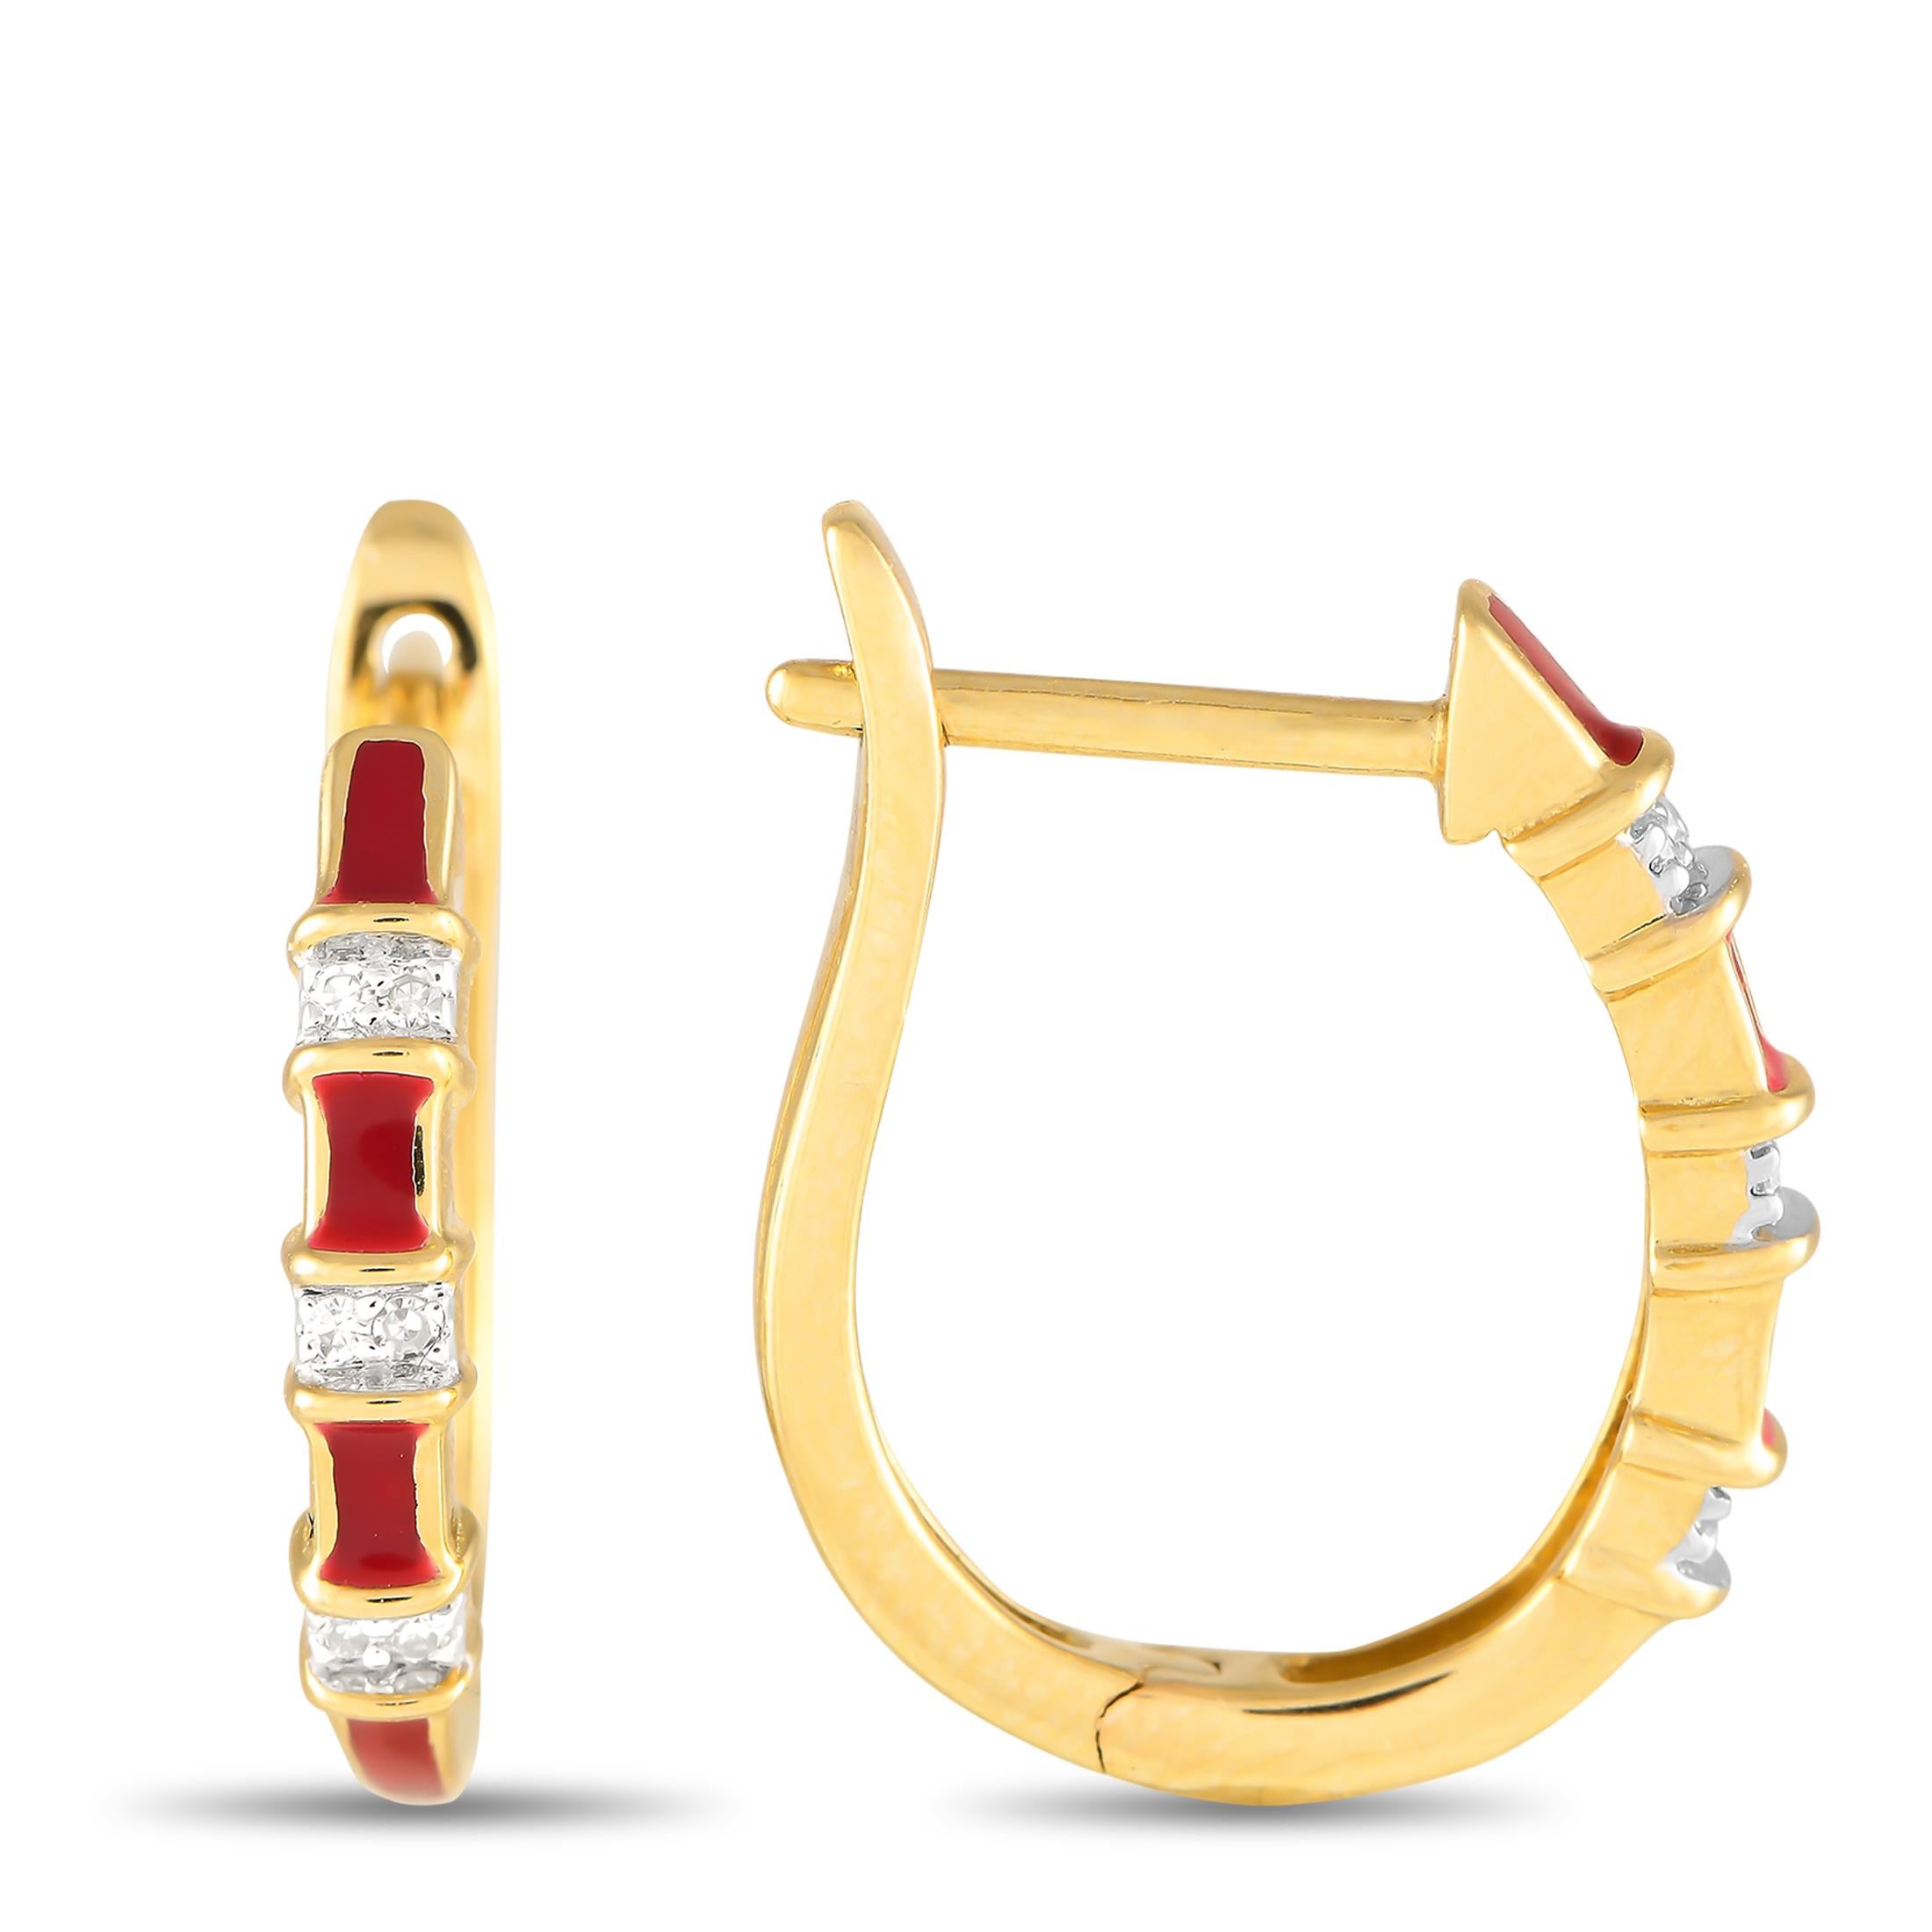 Red enamel accents make these simple, elegant earrings instantly captivating. Each one features a classic 14K Yellow Gold setting measuring 0.65 long by 0.50 wide. Diamonds with a total weight of 0.05 carats provide just a touch of extra